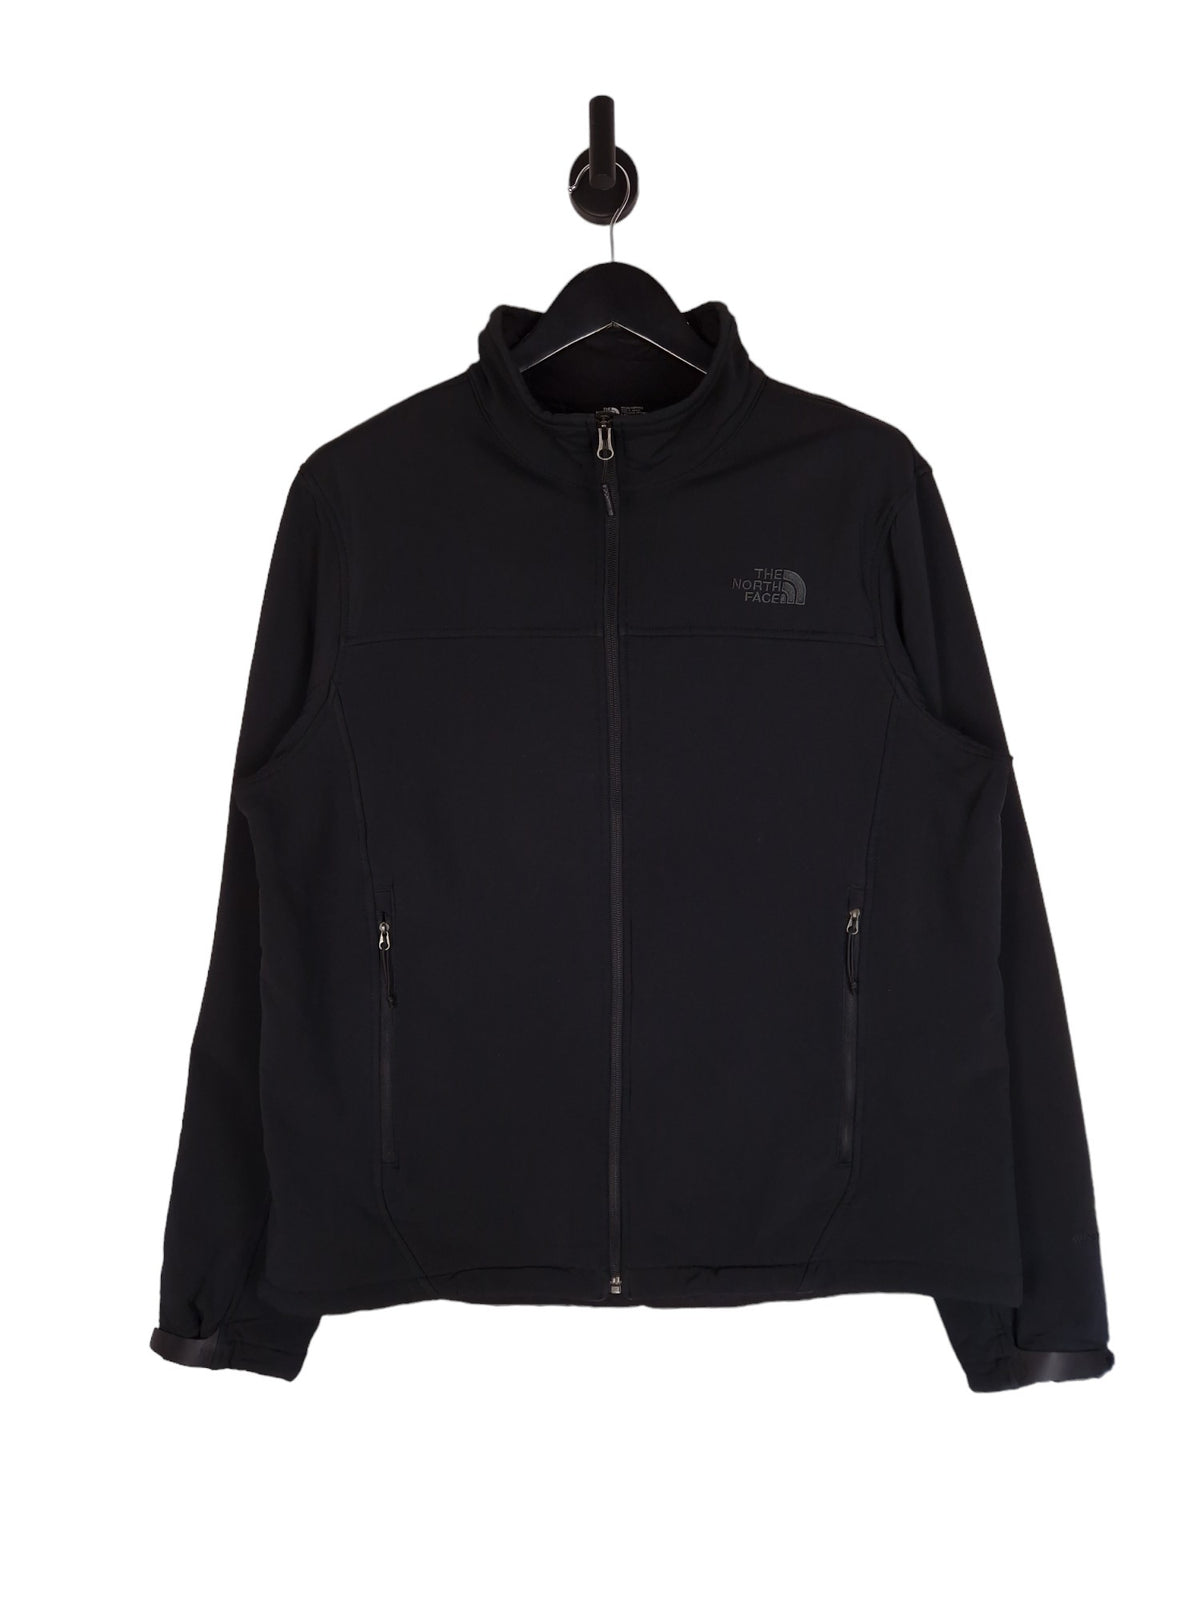 The North Face Windwall Windbreaker - Size Large